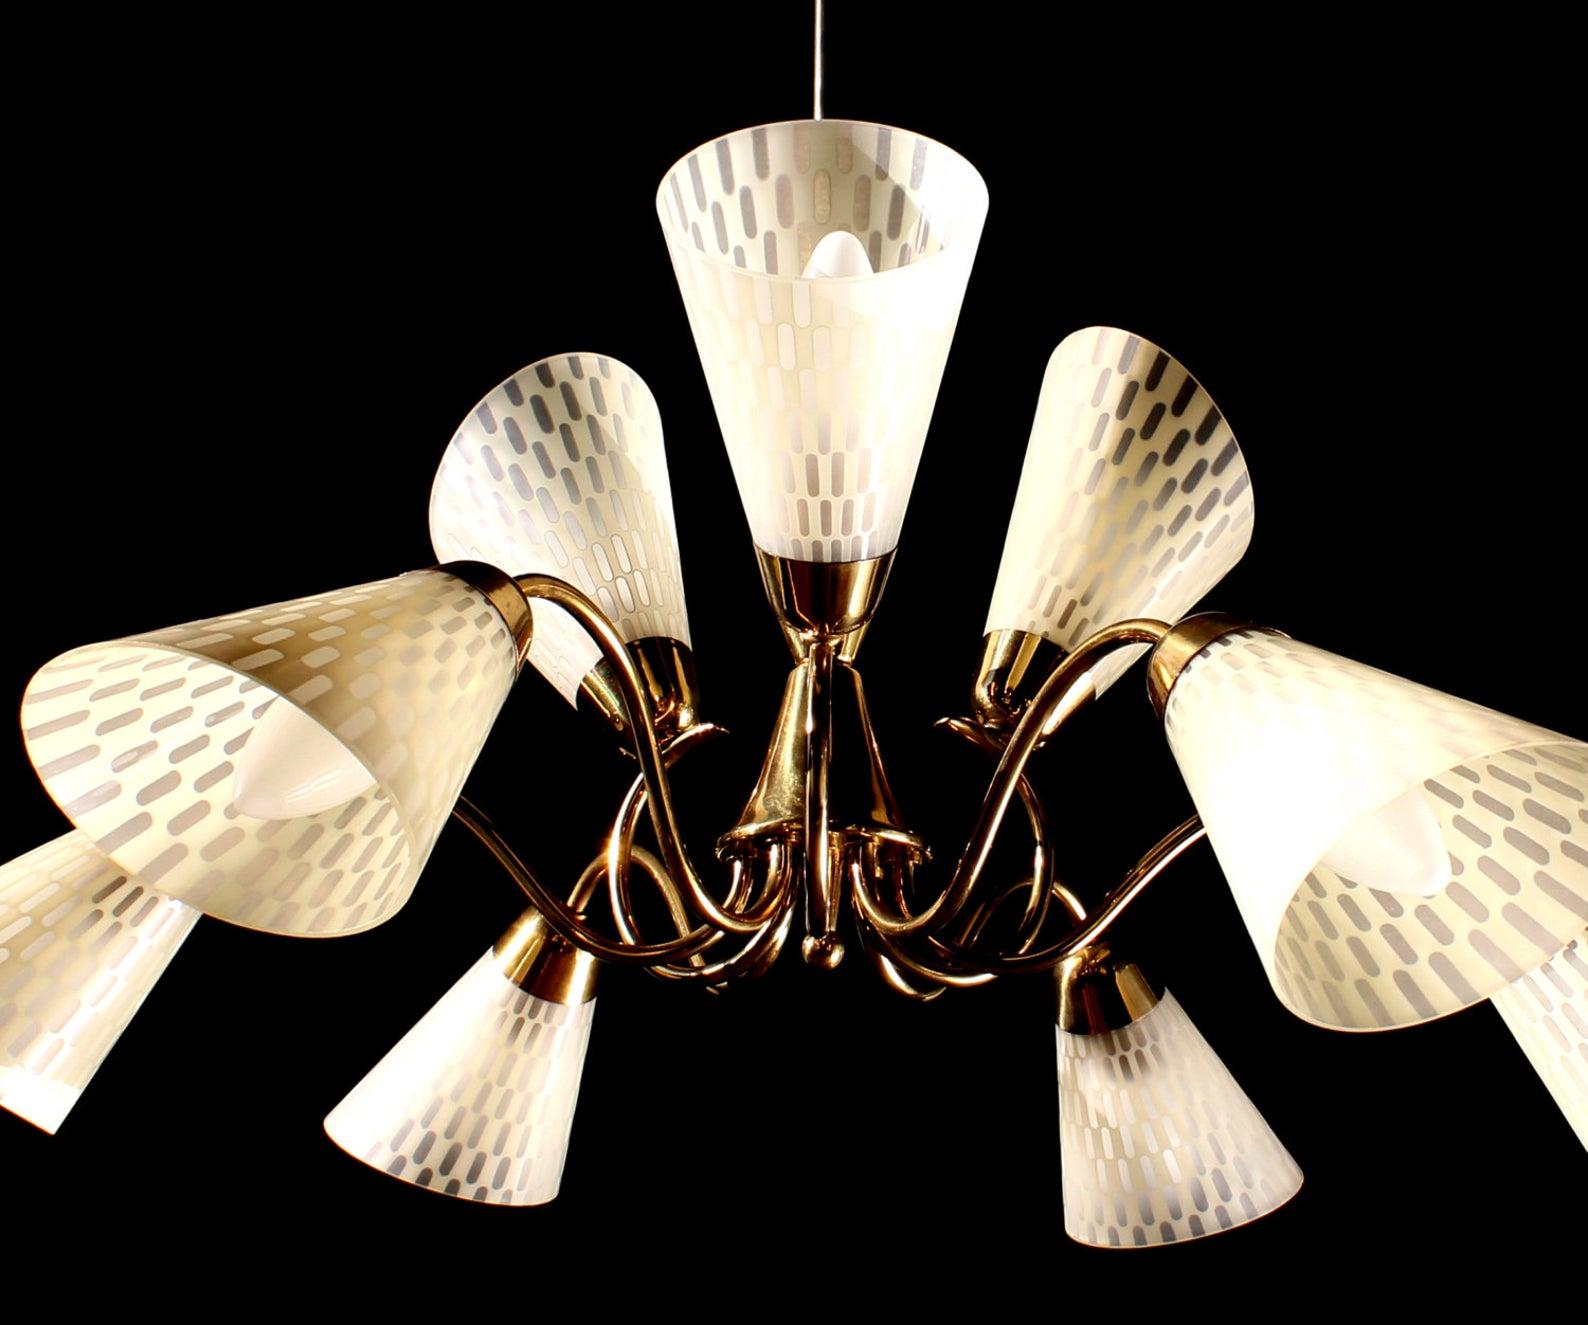 Romantic 1950s butterfly chandelier / Germany. 9-light (e14) / rewired
Brass and fine enameled art glass blossoms

Measures: Diameter 24 inches, original height 32 inches

This fine small chandelier is a timeless and elegant masterpiece of